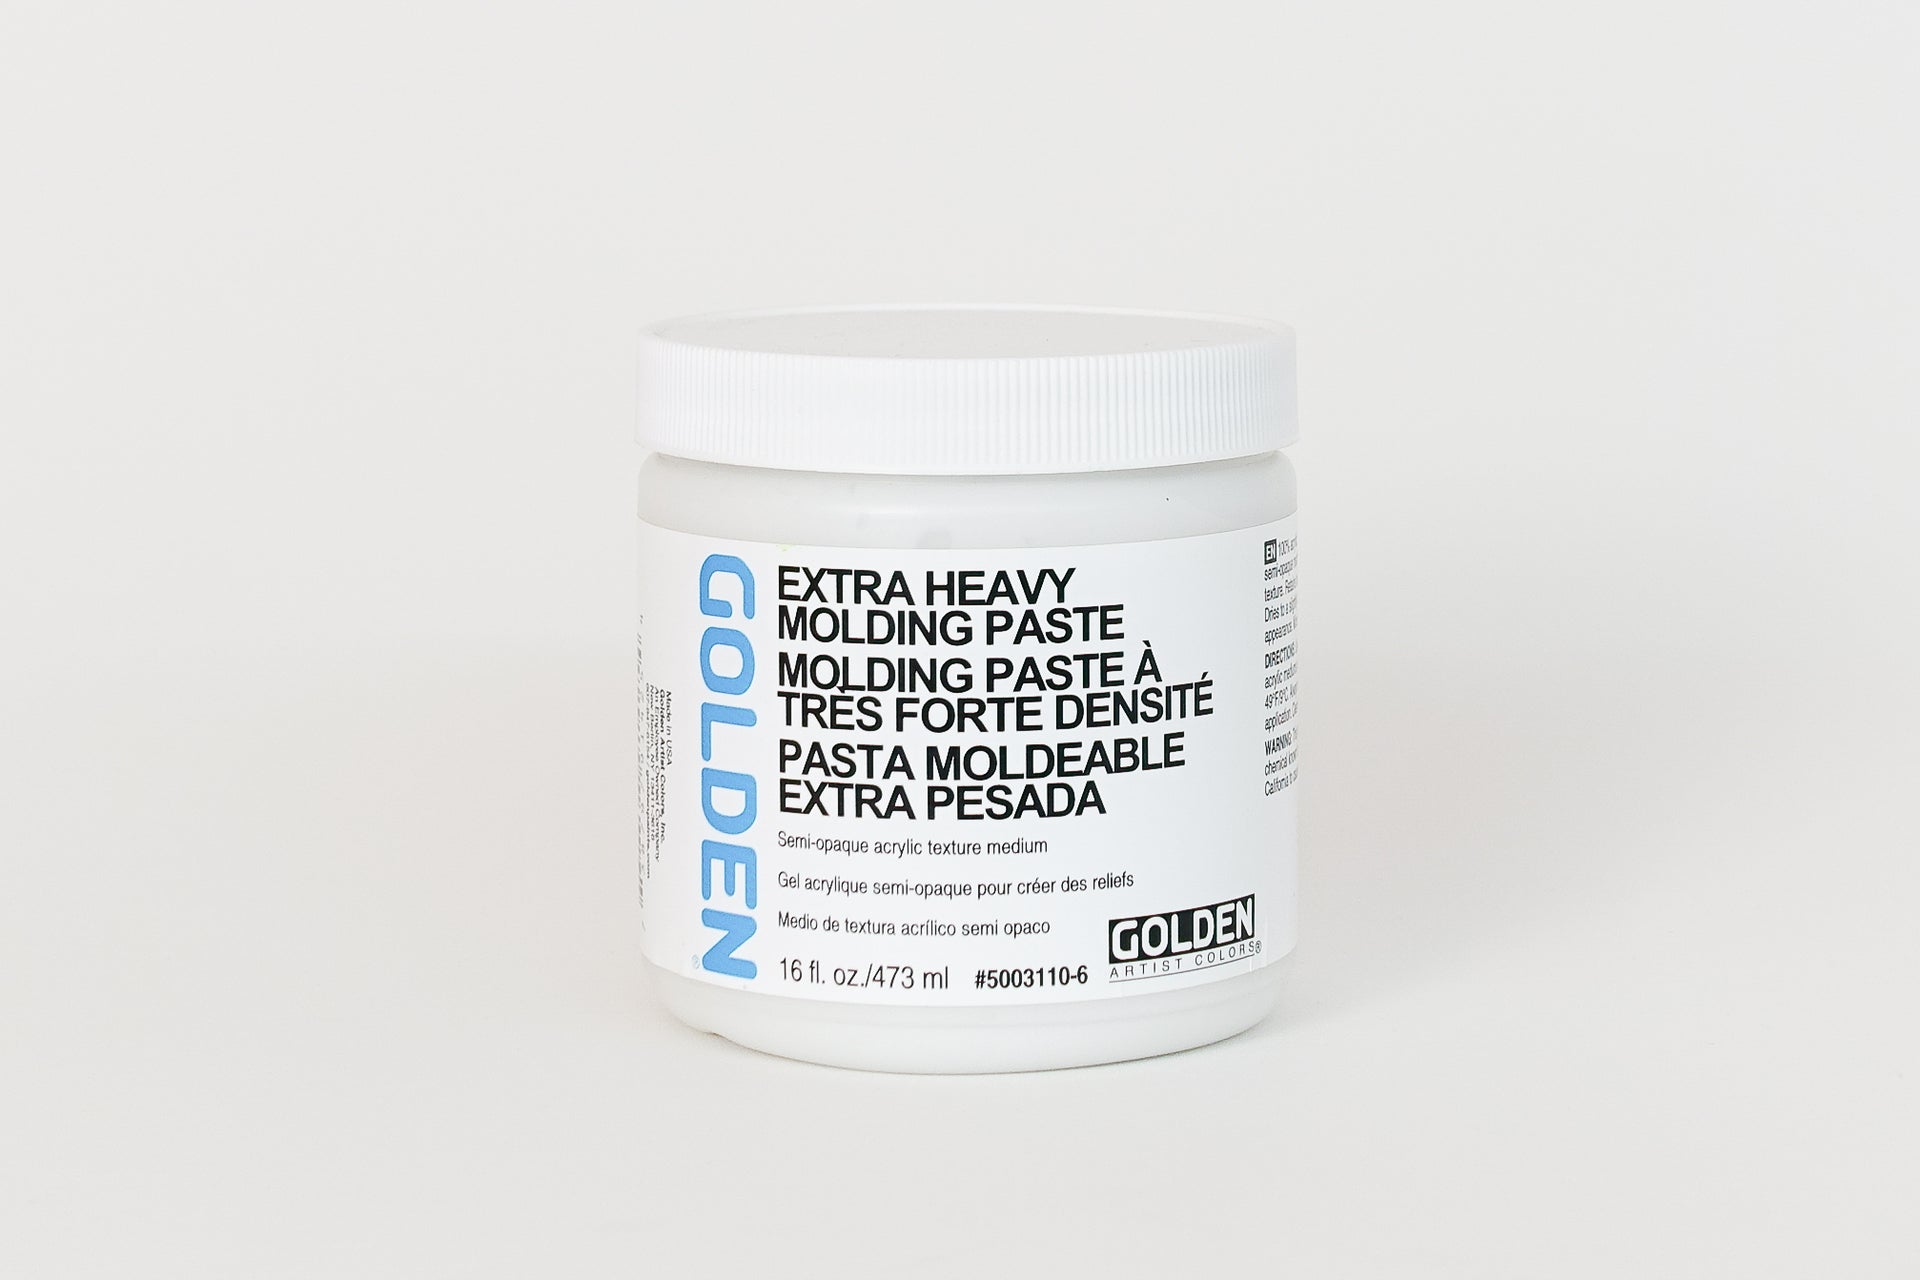 Acrylic] Light Molding Paste for Building Texture 